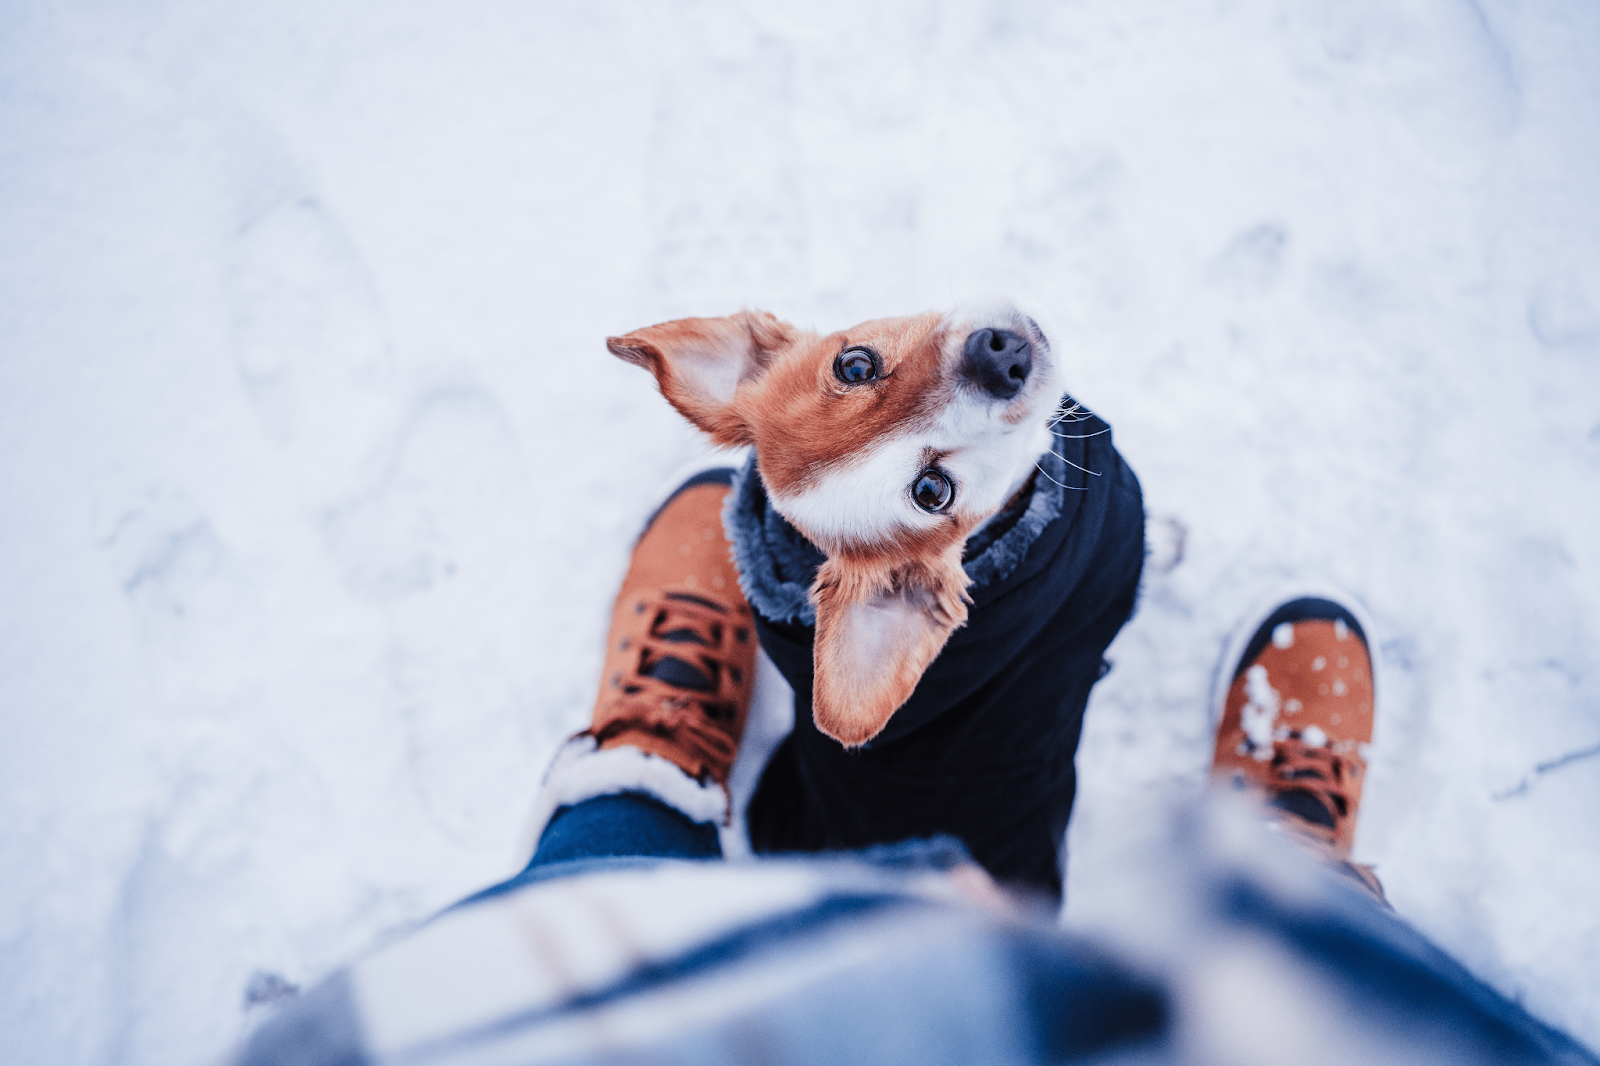 A small Jack Russell dog standing between owner’s legs in the snow.